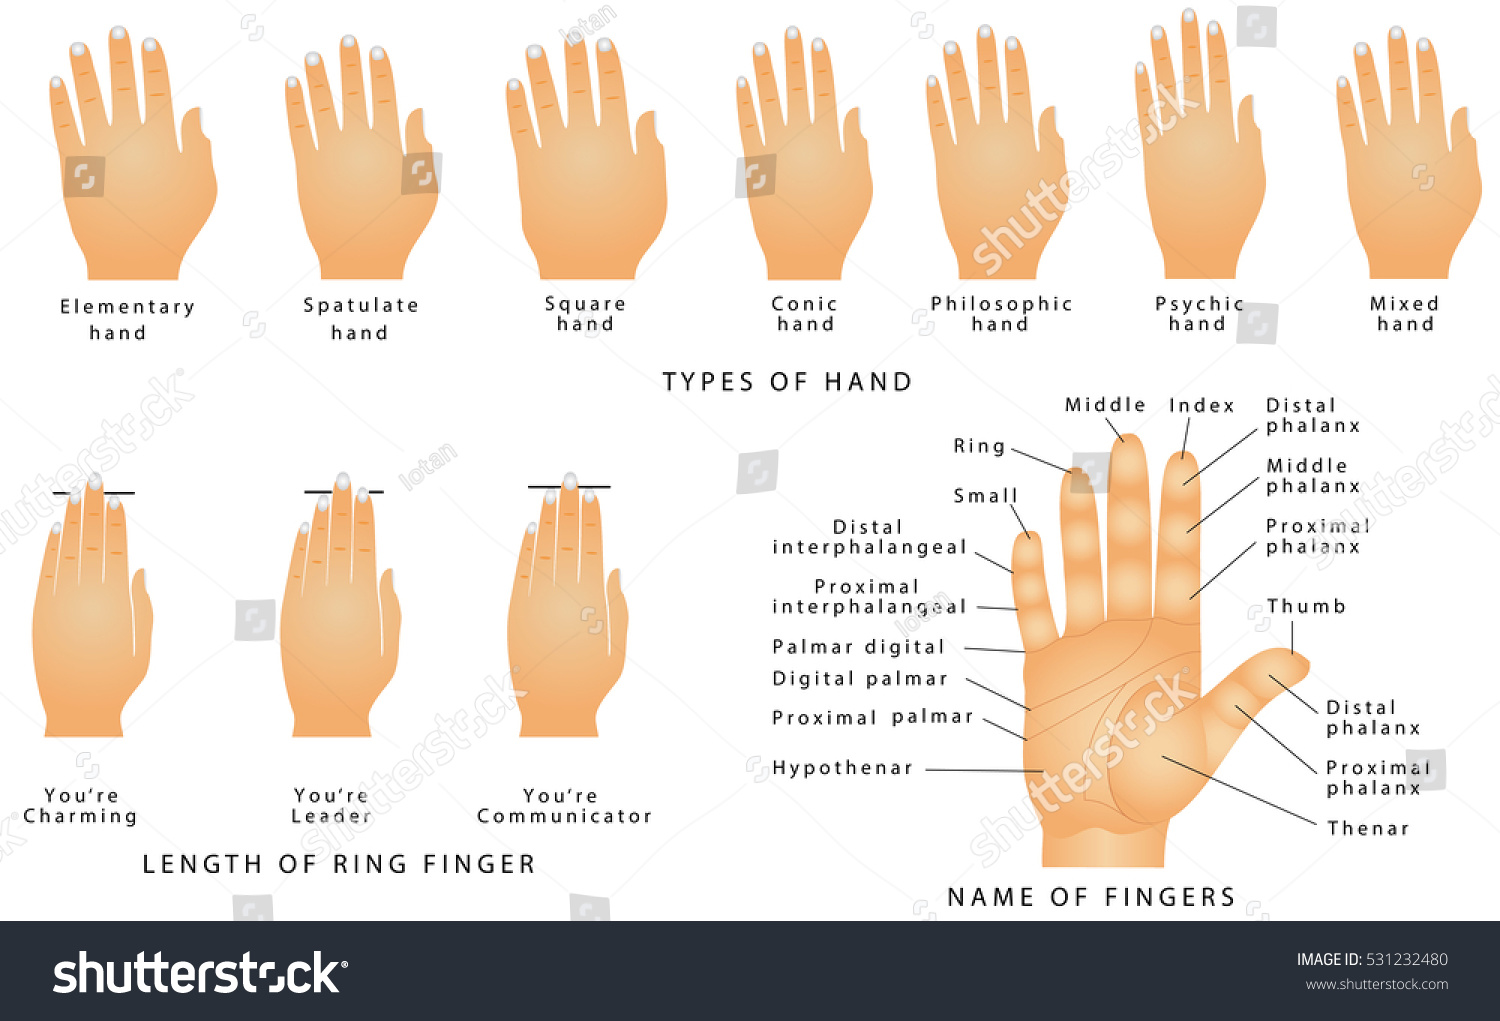 Royalty-free Names of the Fingers. Types of hands. Types of… #531232480 ...